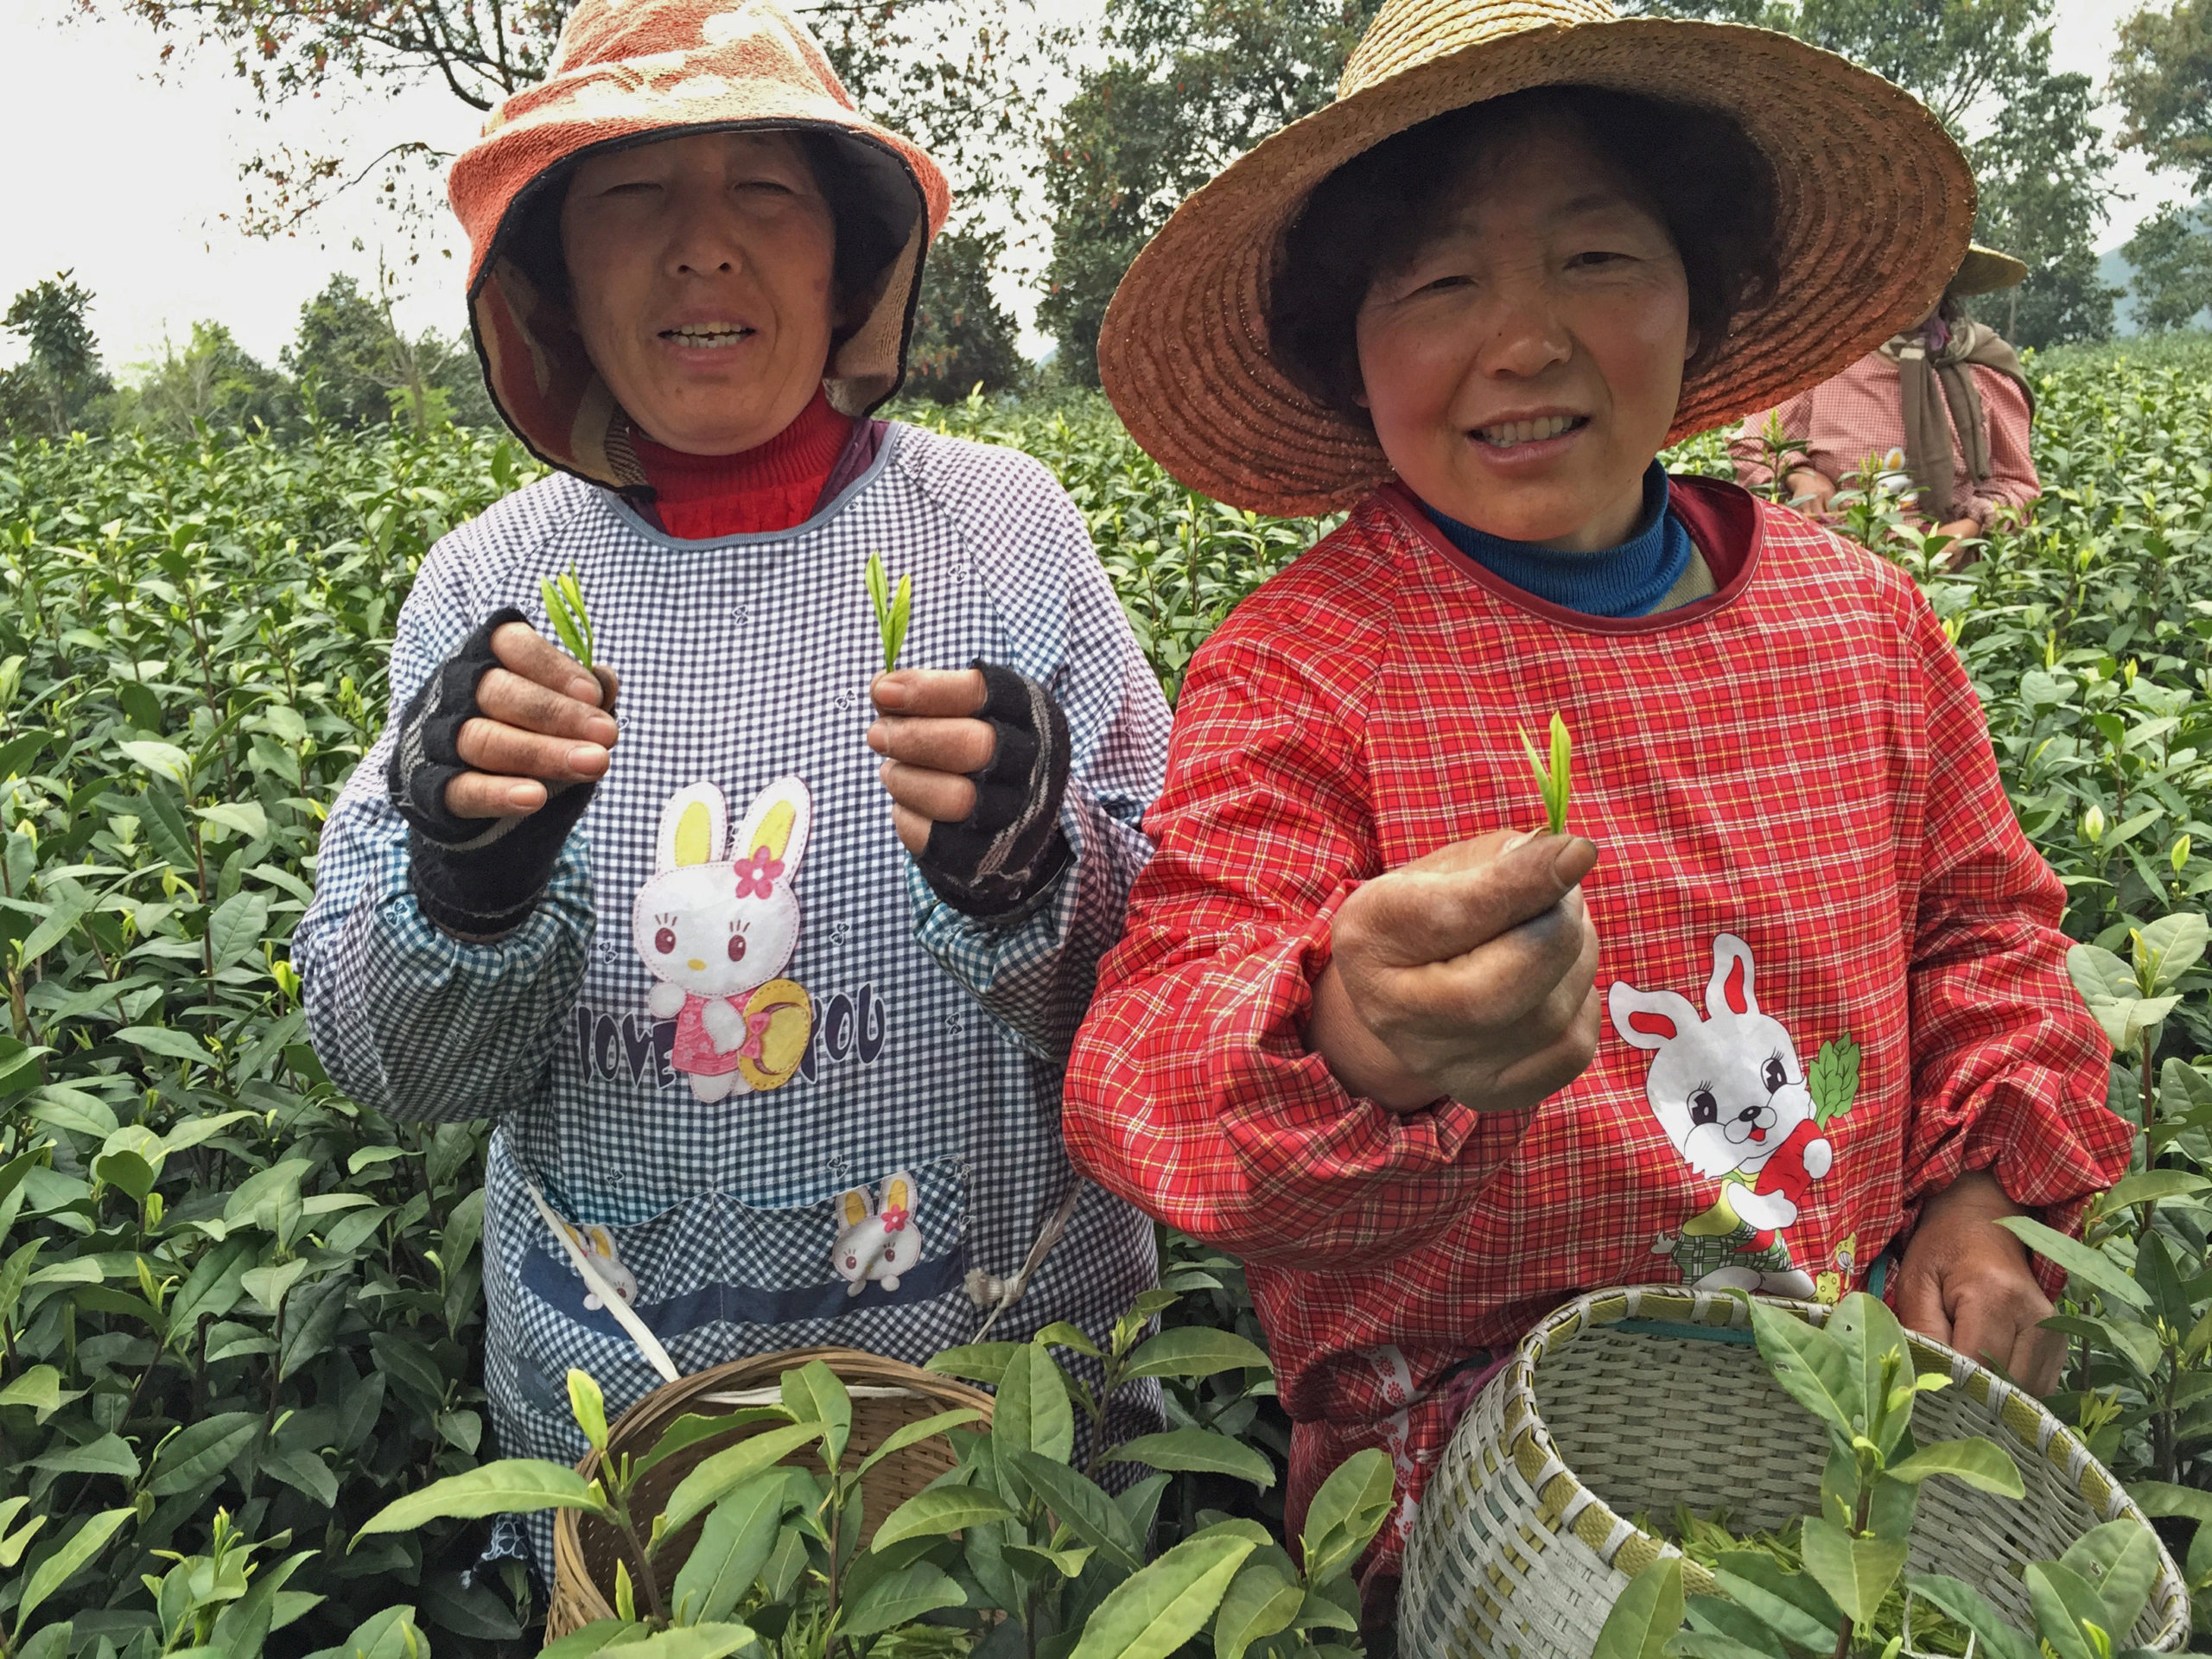 Two ladies in hats and smocks standing among the tea bushes, holding up the fresh sprigs of green tea they’ve just plucked.